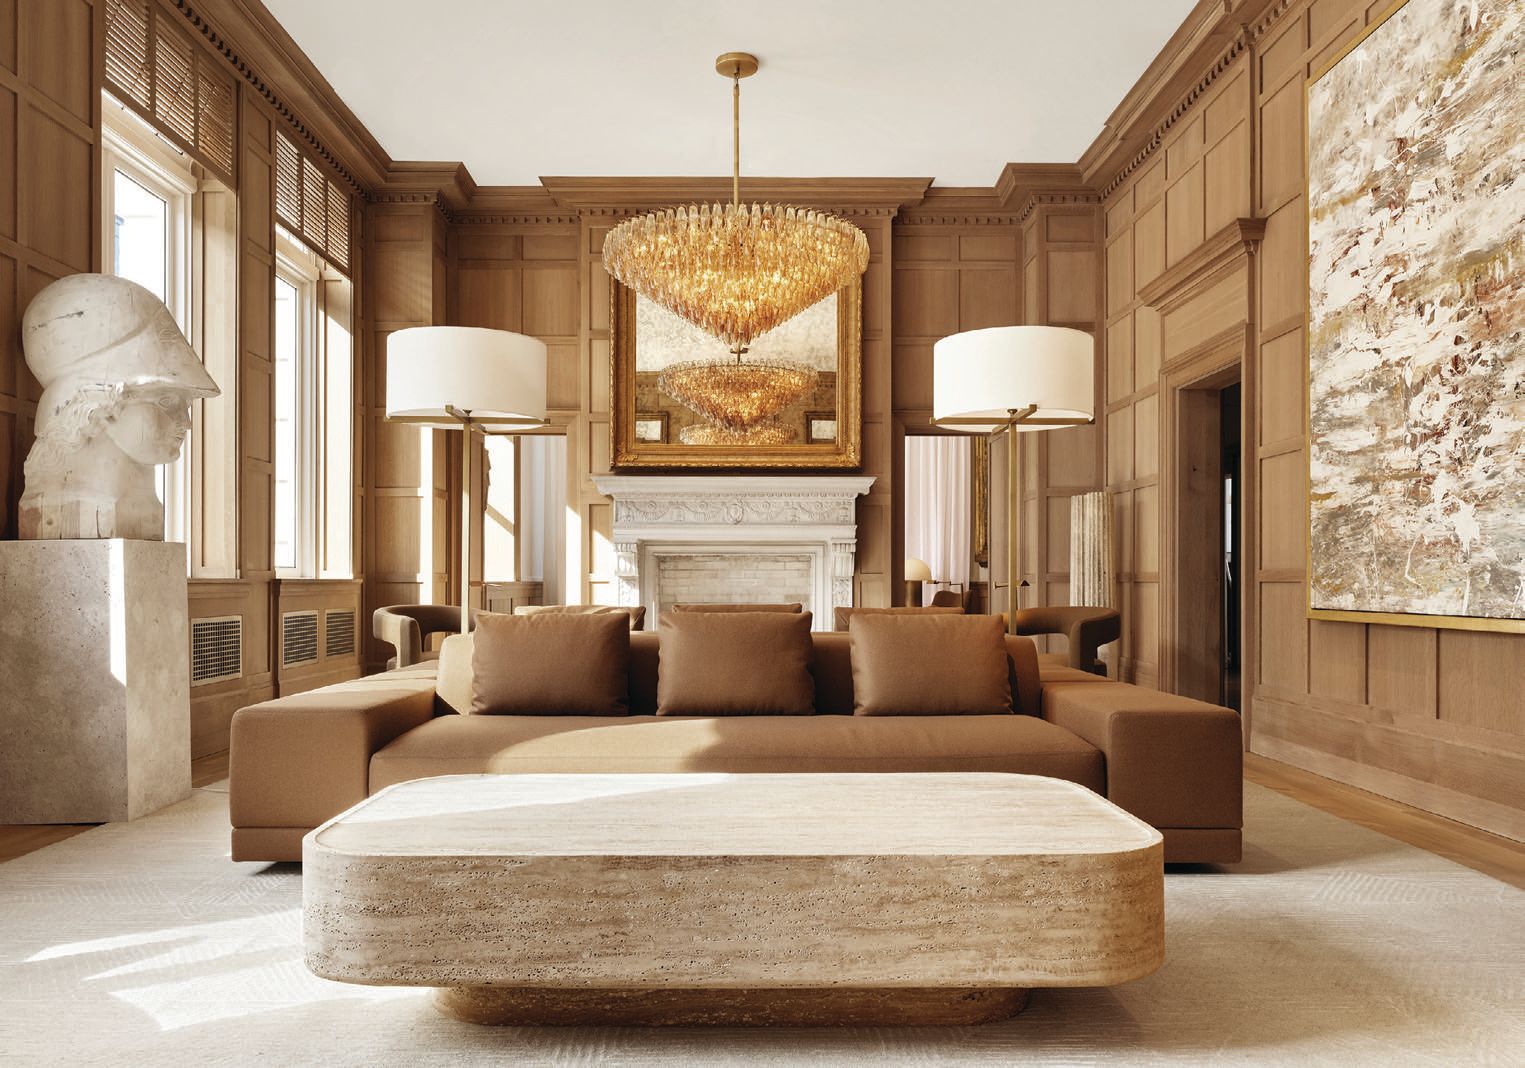 The new RH covers five levels and 80,000 square feet of dreamy home settings PHOTO COURTES OF RH